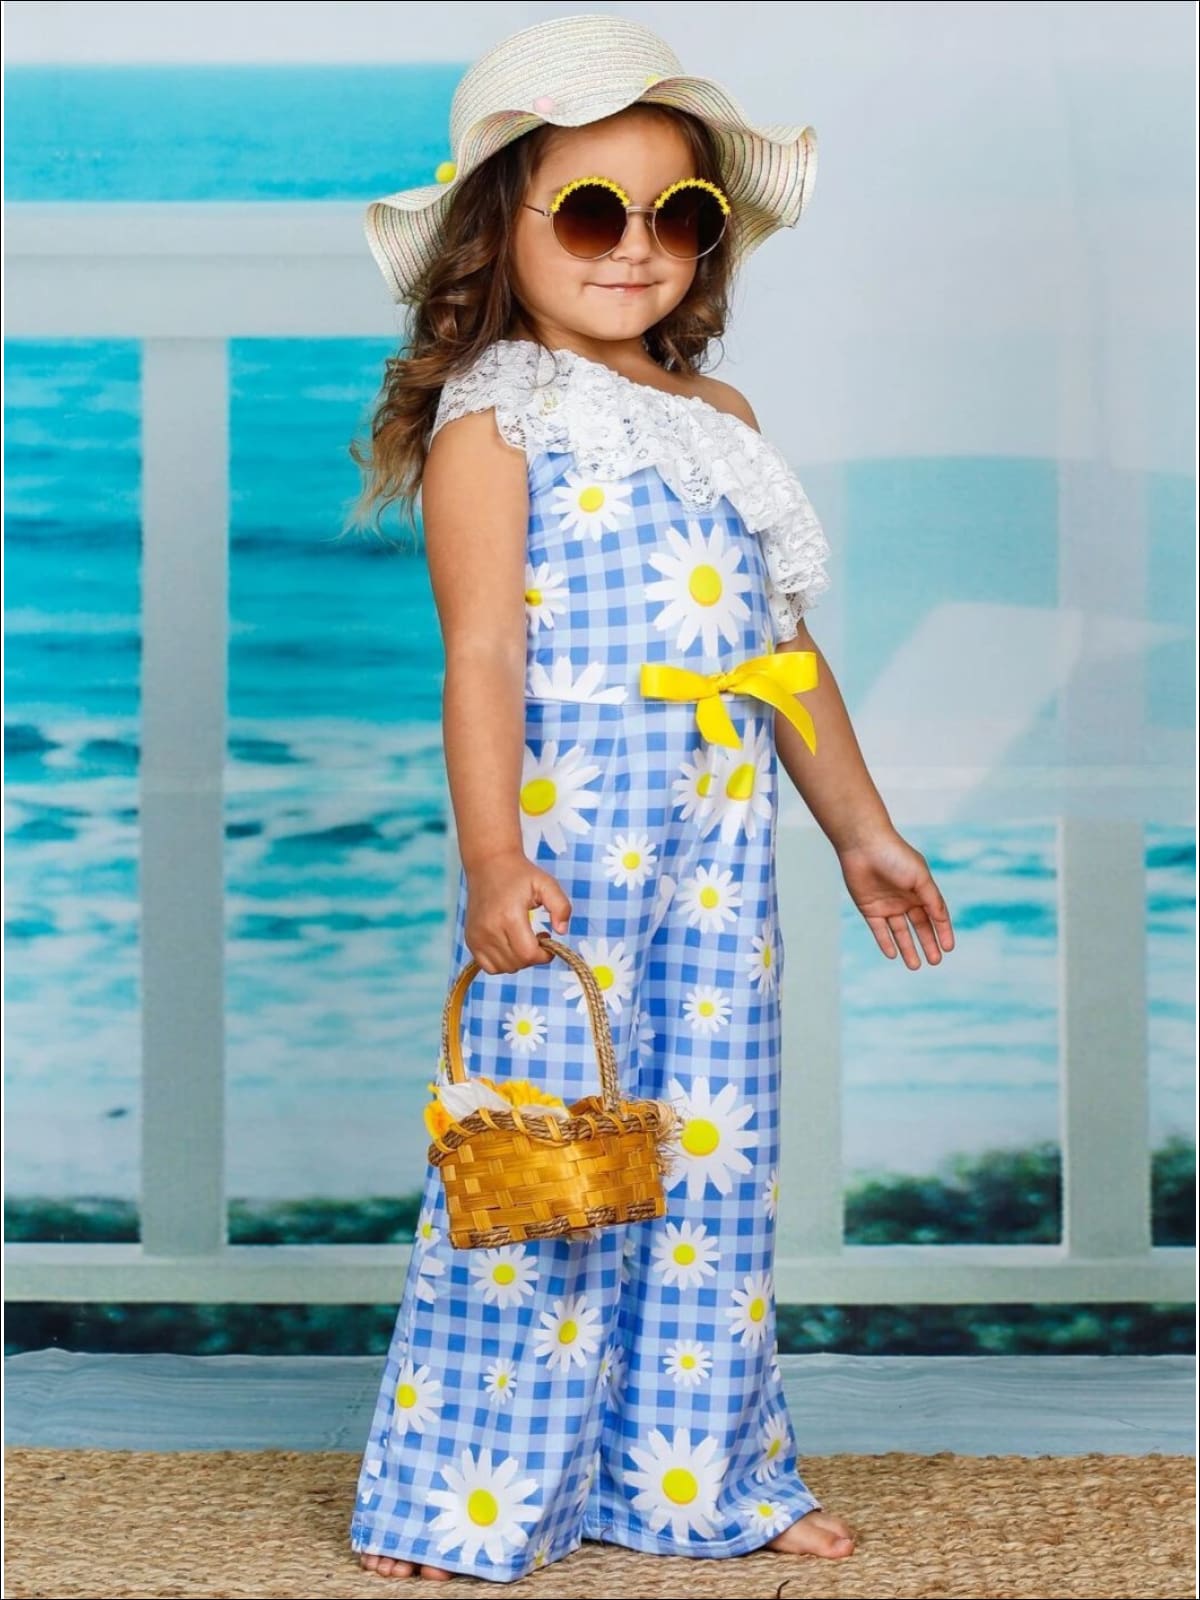 Toddler Spring Outfits | Girls Lace Bib One Shoulder Palazzo Jumpsuit